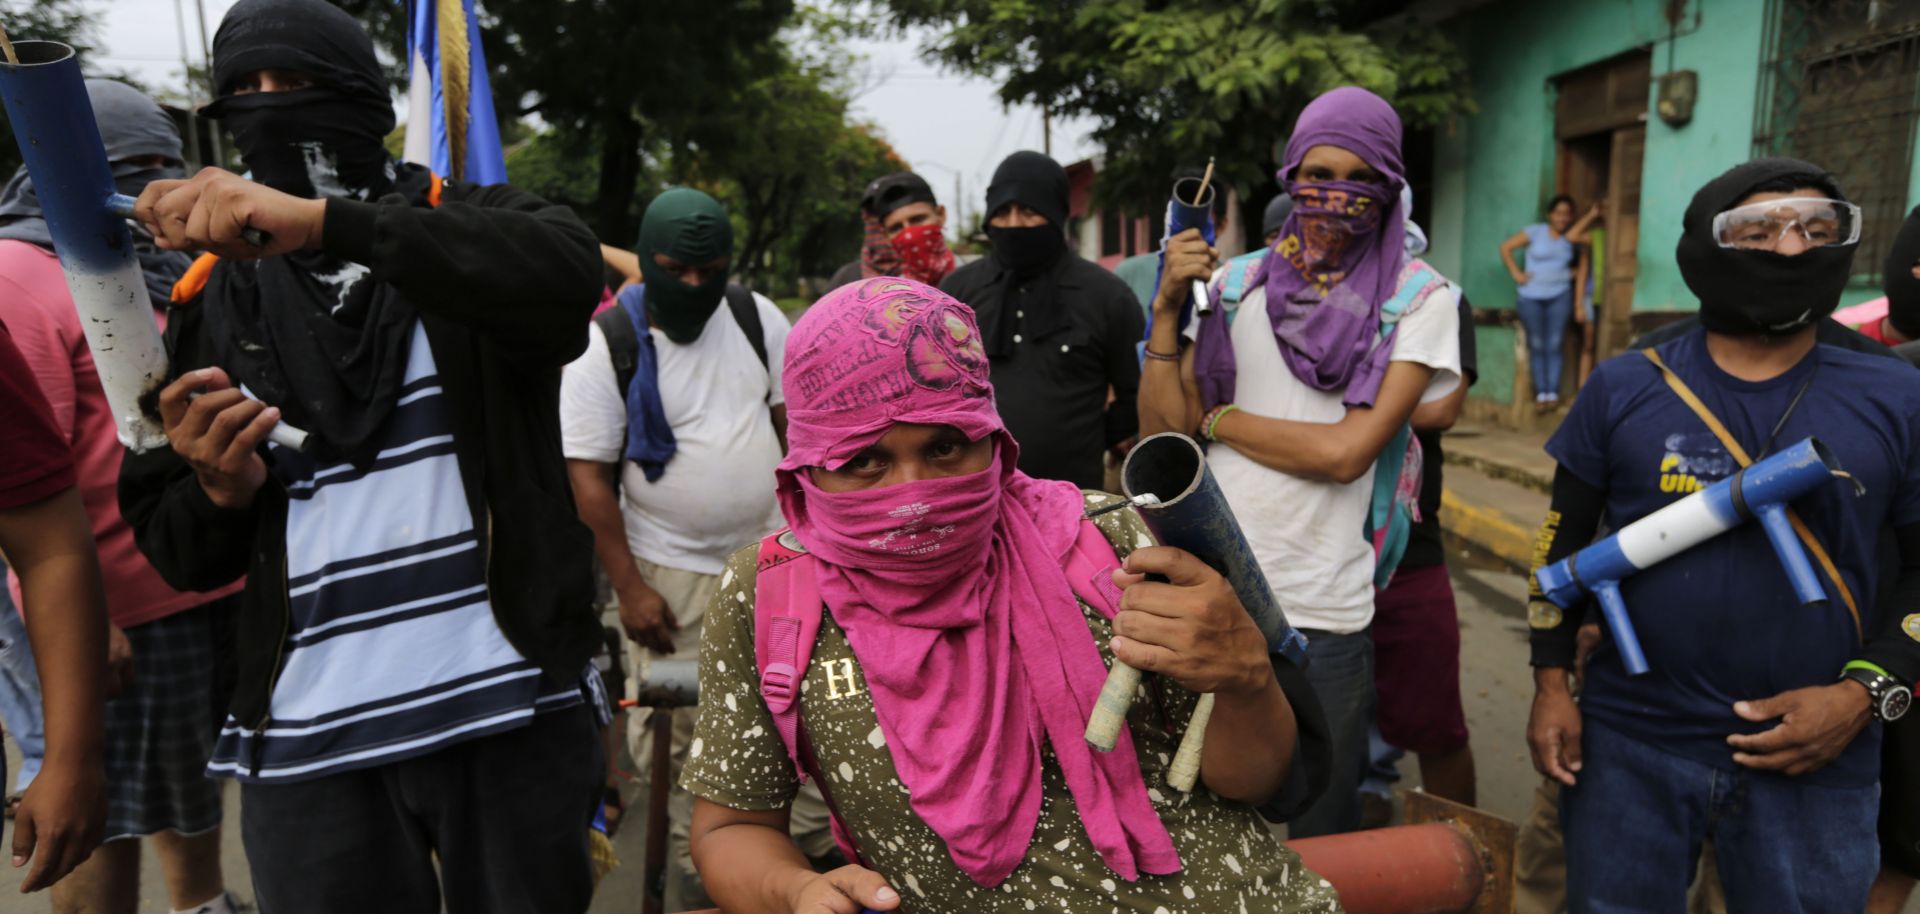 Anti-government demonstrators carry homemade mortars, as they stand near a barricade in Masaya, Nicaragua, on June 5.